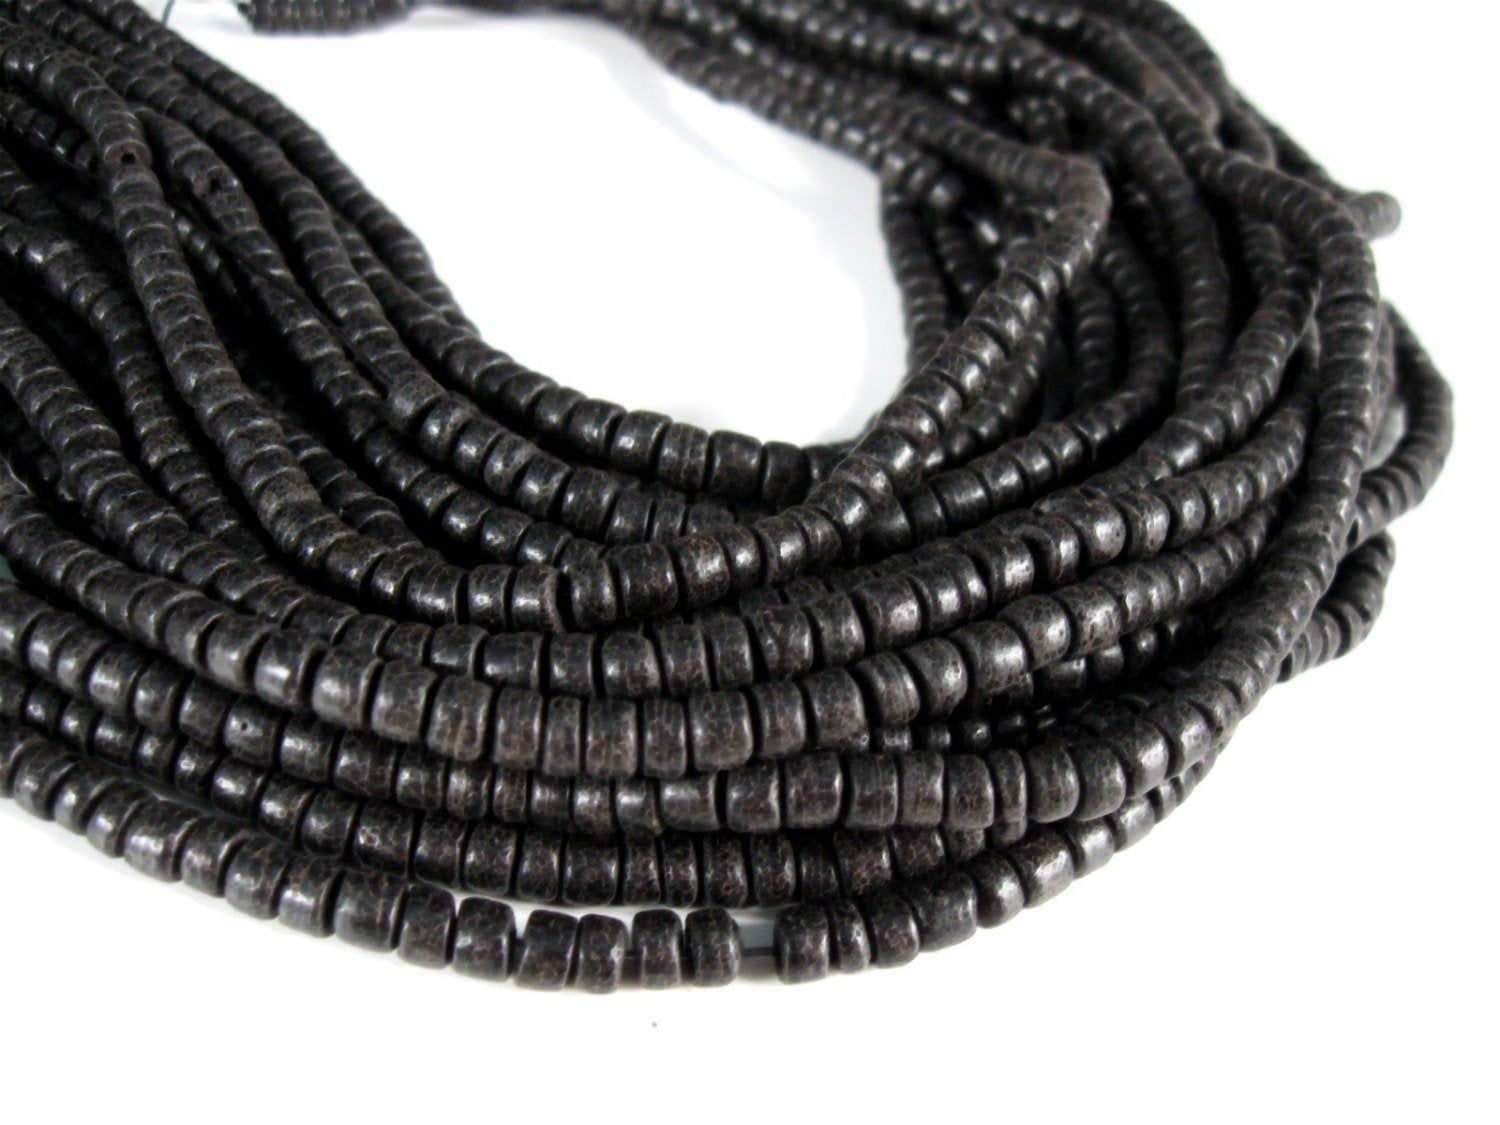 5mm black wood beads, 85pcs natural wooden beads, Round spacer beads for  jewelry making